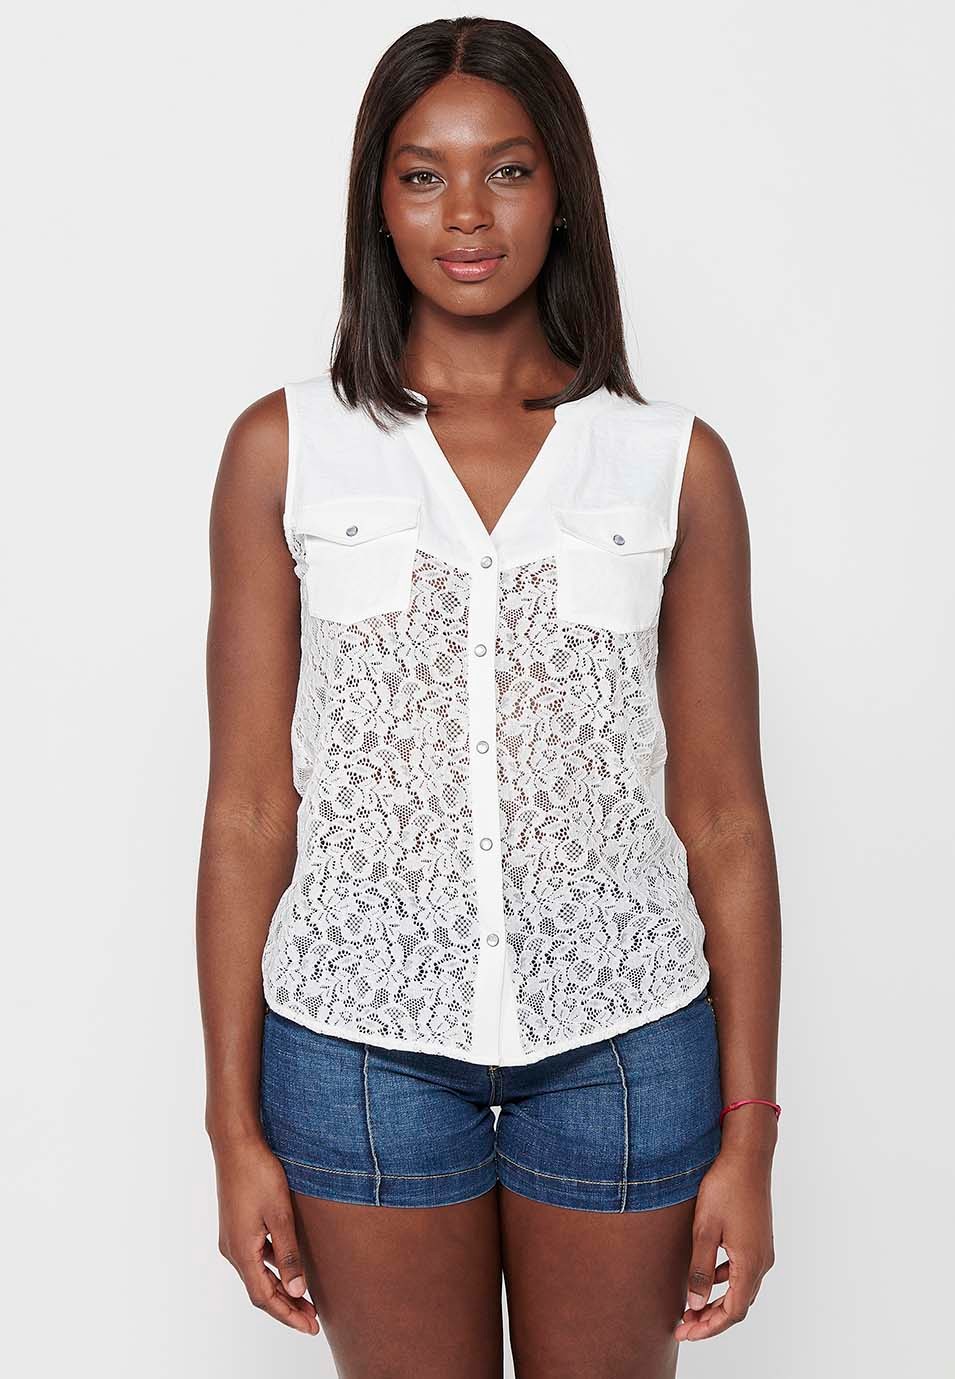 Sleeveless blouse, shirt collar and front buttons, white color for women